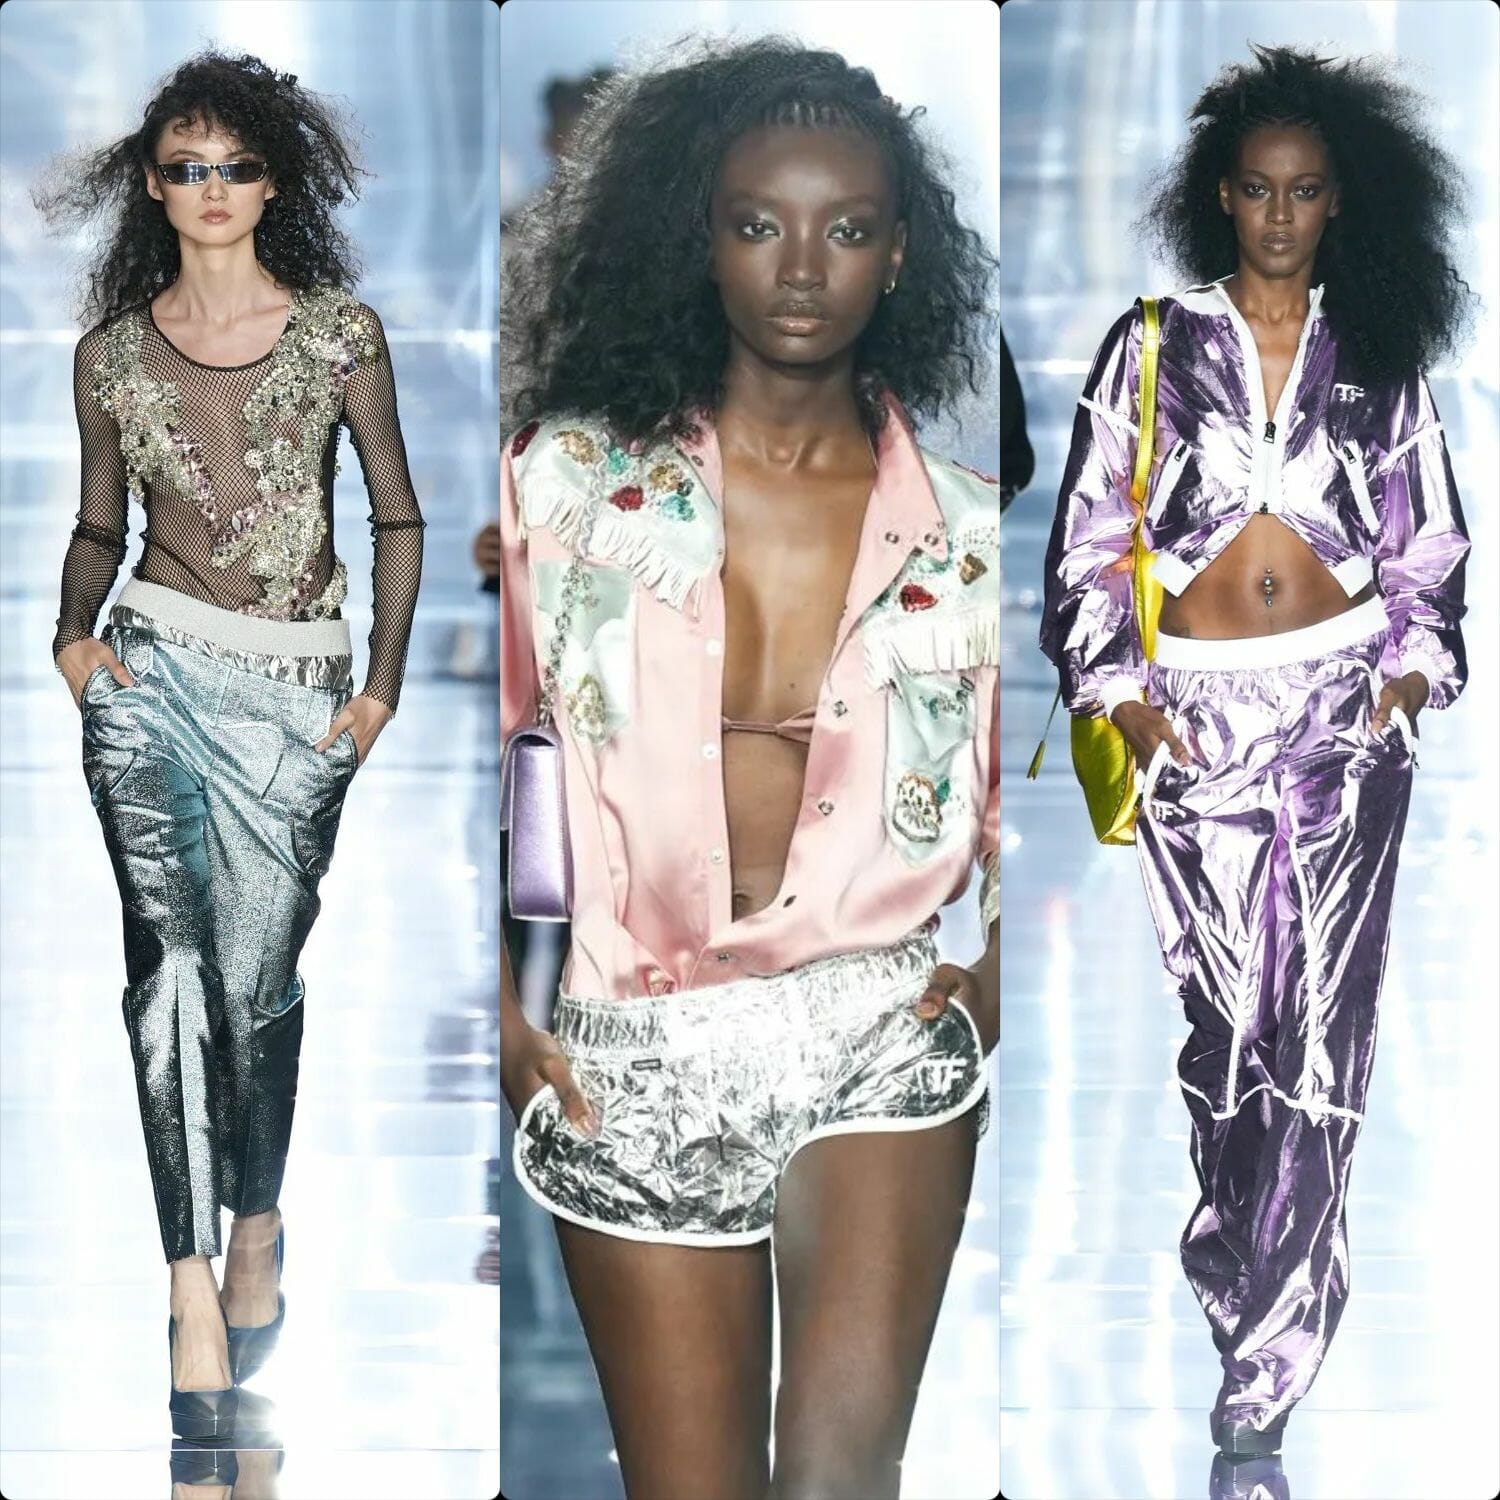 Tom Ford's Spring/Summer 2023 Show Closed Out NYFW With '80s Opulence